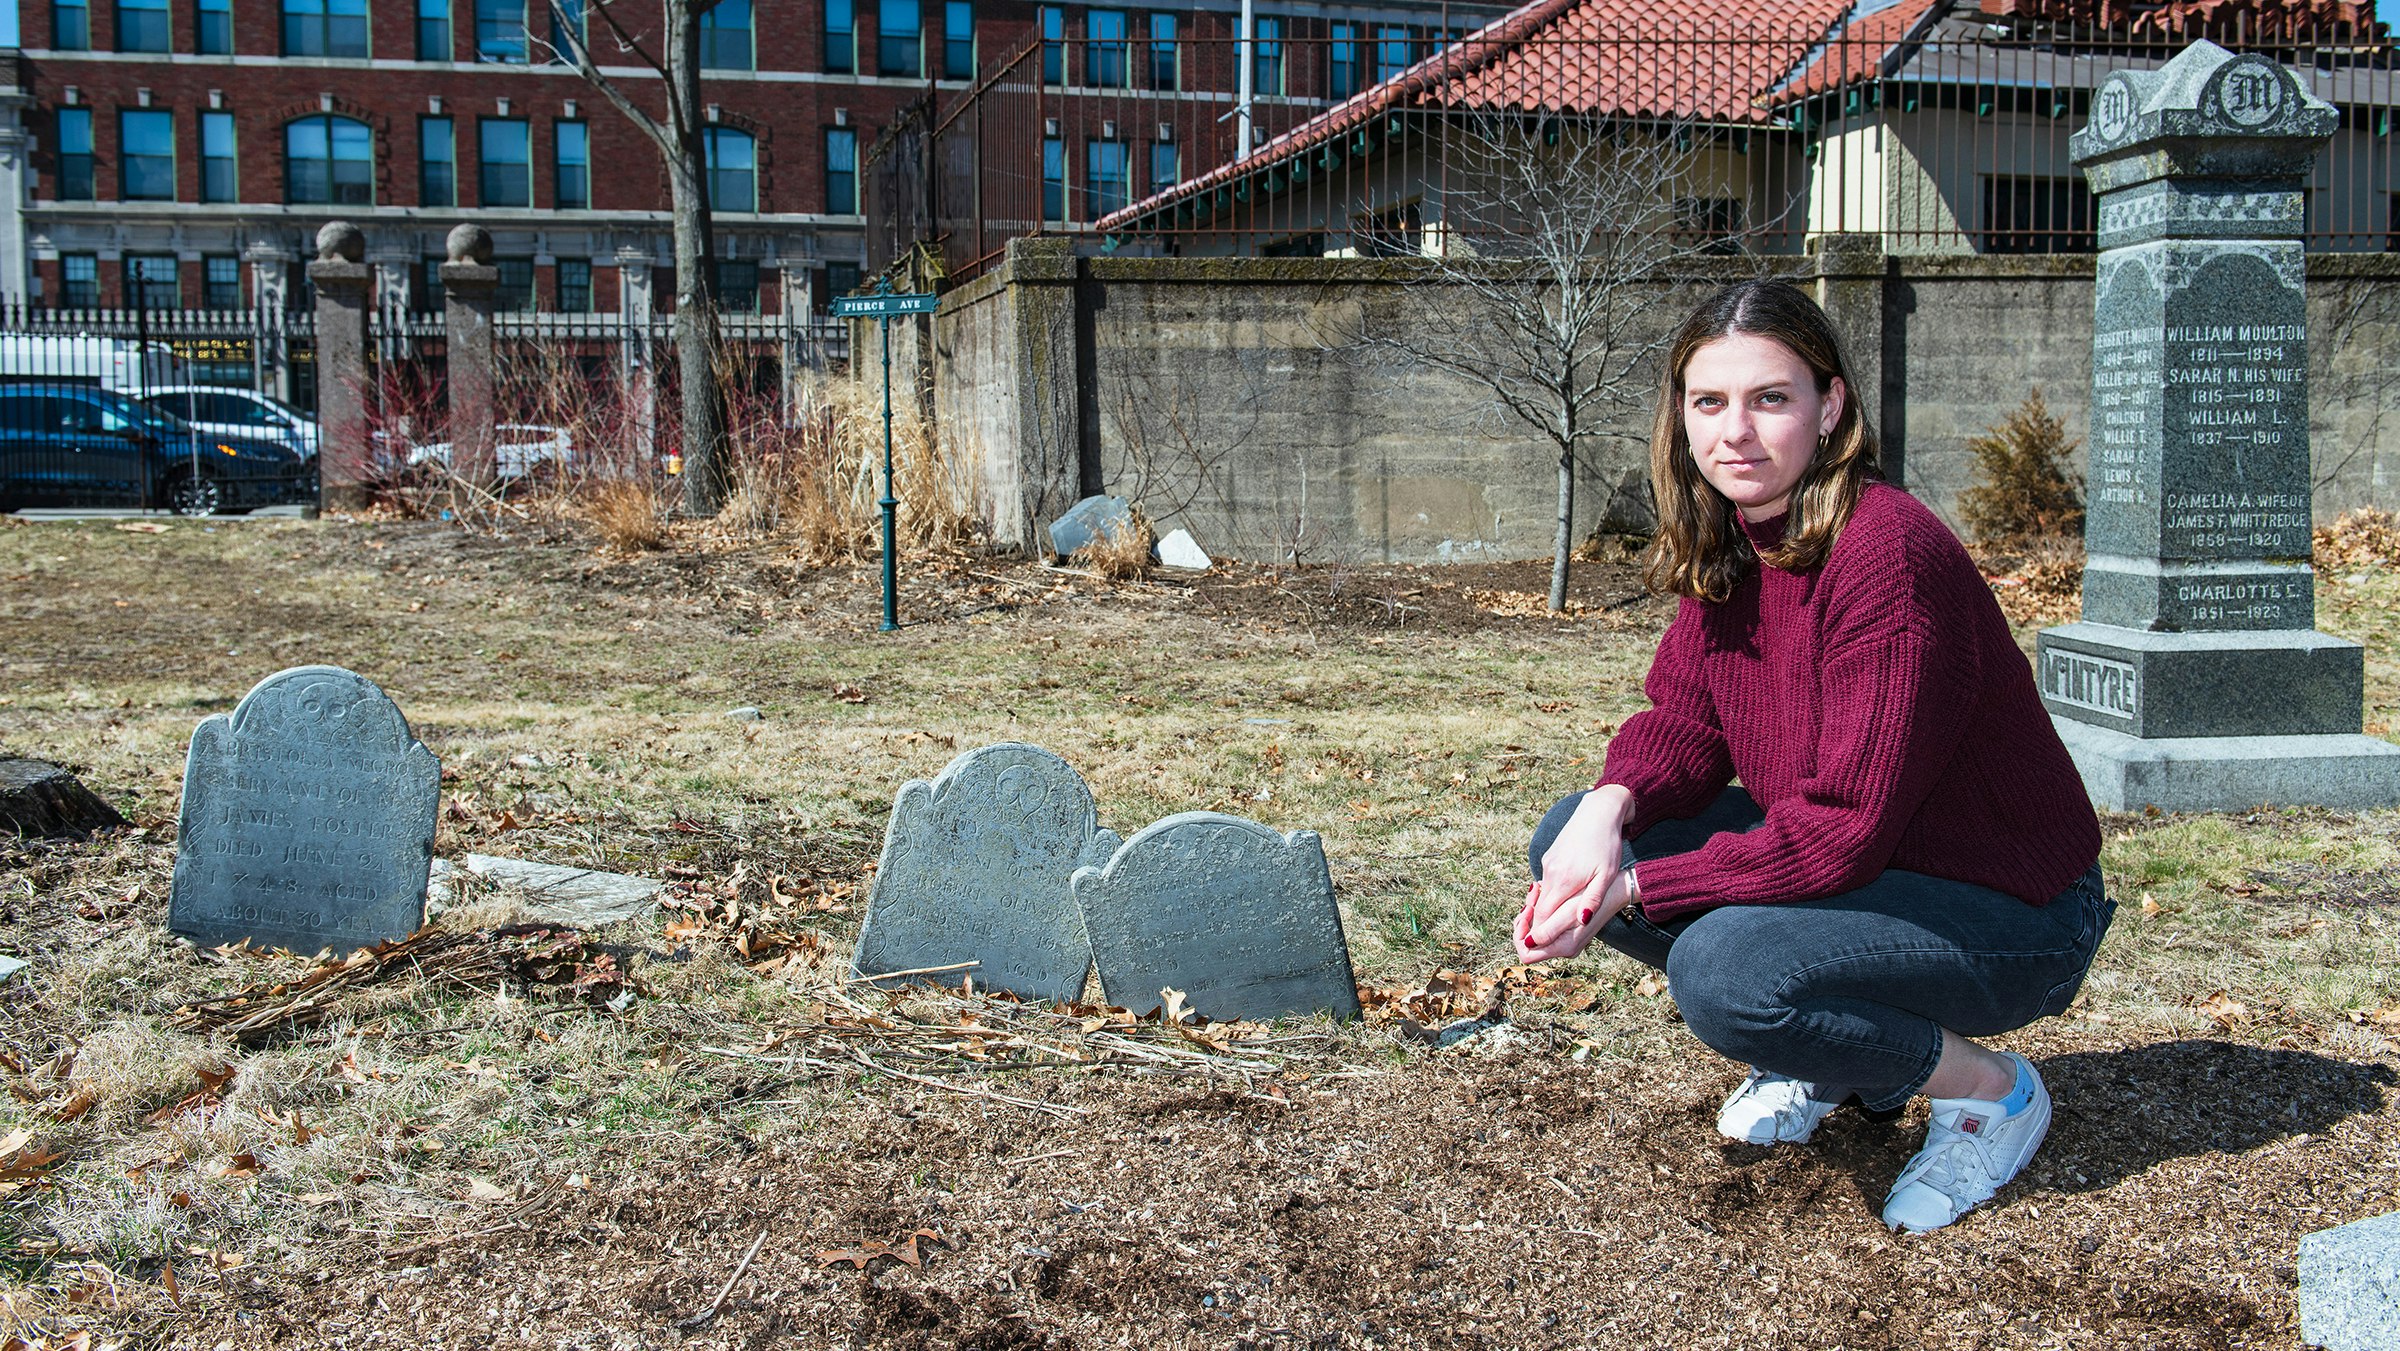 A casually dressed woman looks directly at the camera as she squats down next to modest antique gravestones situated in an urban cemetery. Low city buildings are visible in the background.